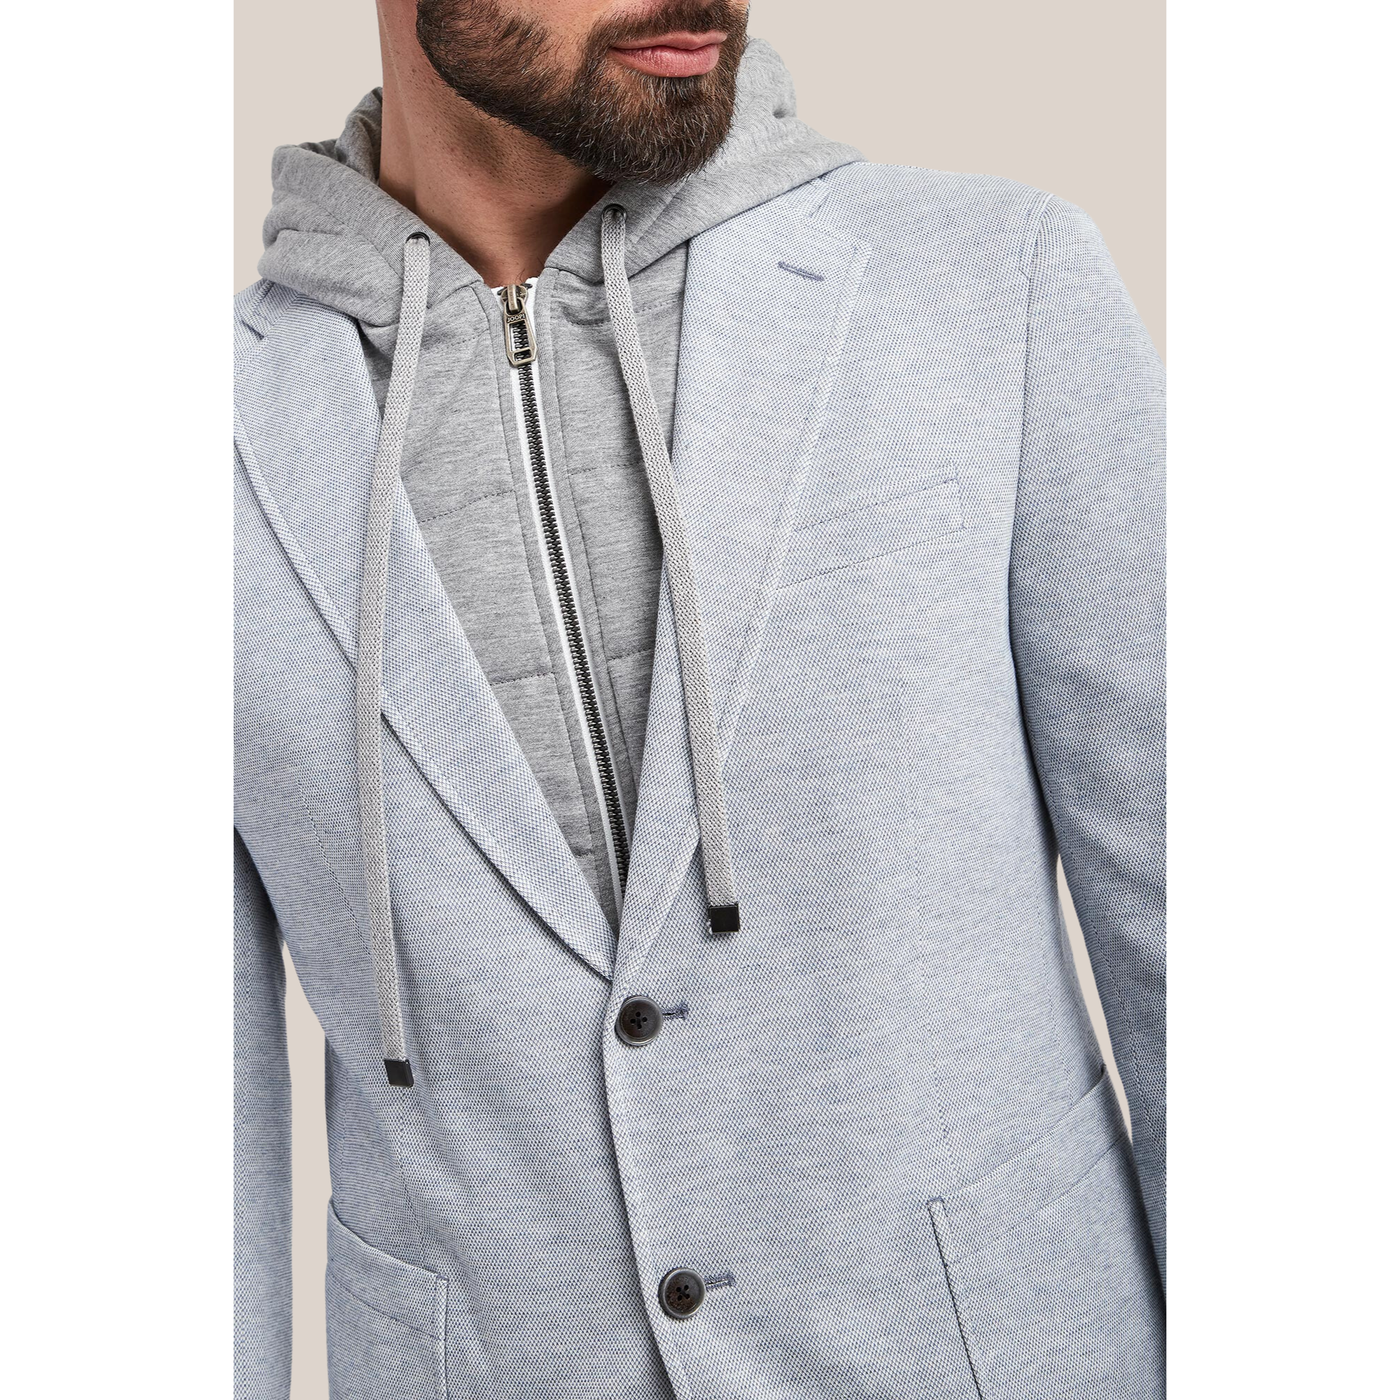 Gotstyle Fashion - Joop! Blazers Patch Pocket Blazer with Removable Hoodie - Blue